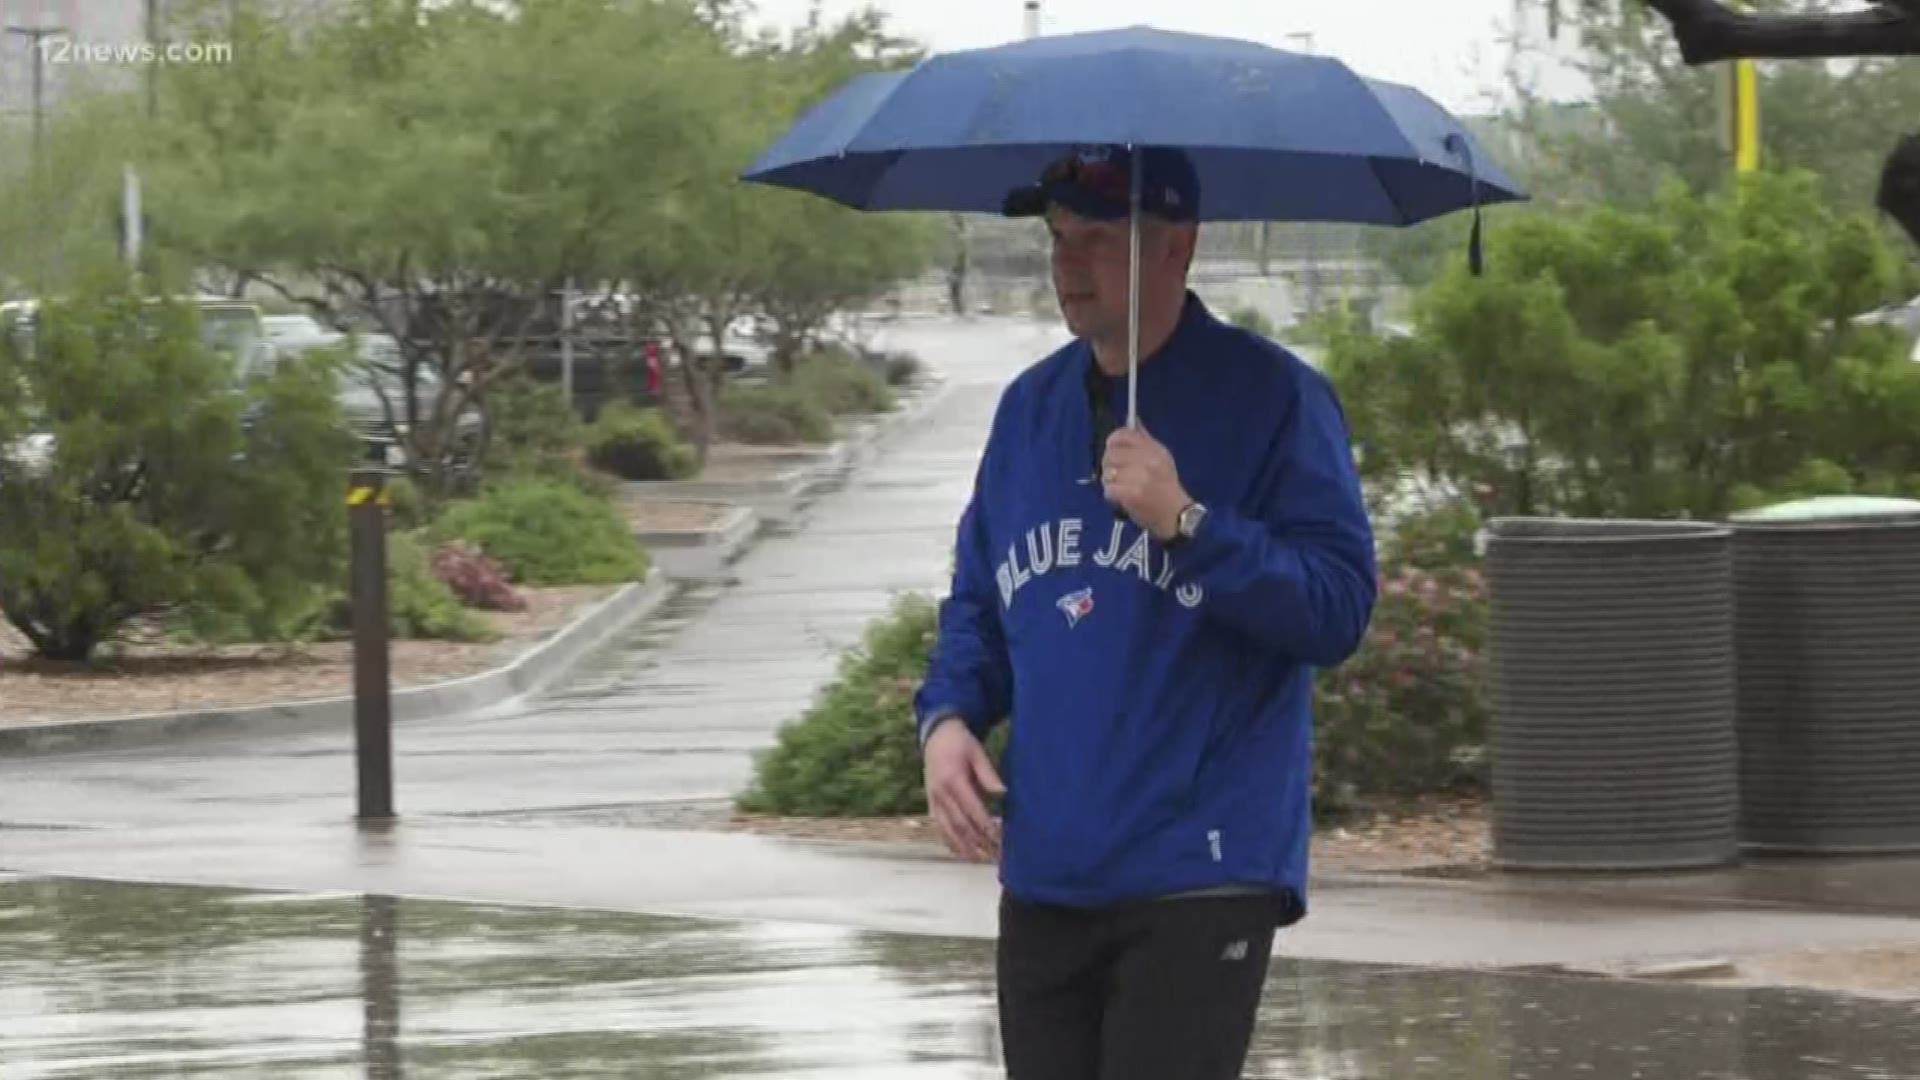 Rain in the Valley is usually a good thing, but not when you're trying to enjoy a spring training game. Despite the wet weather baseball fans tried to push through.